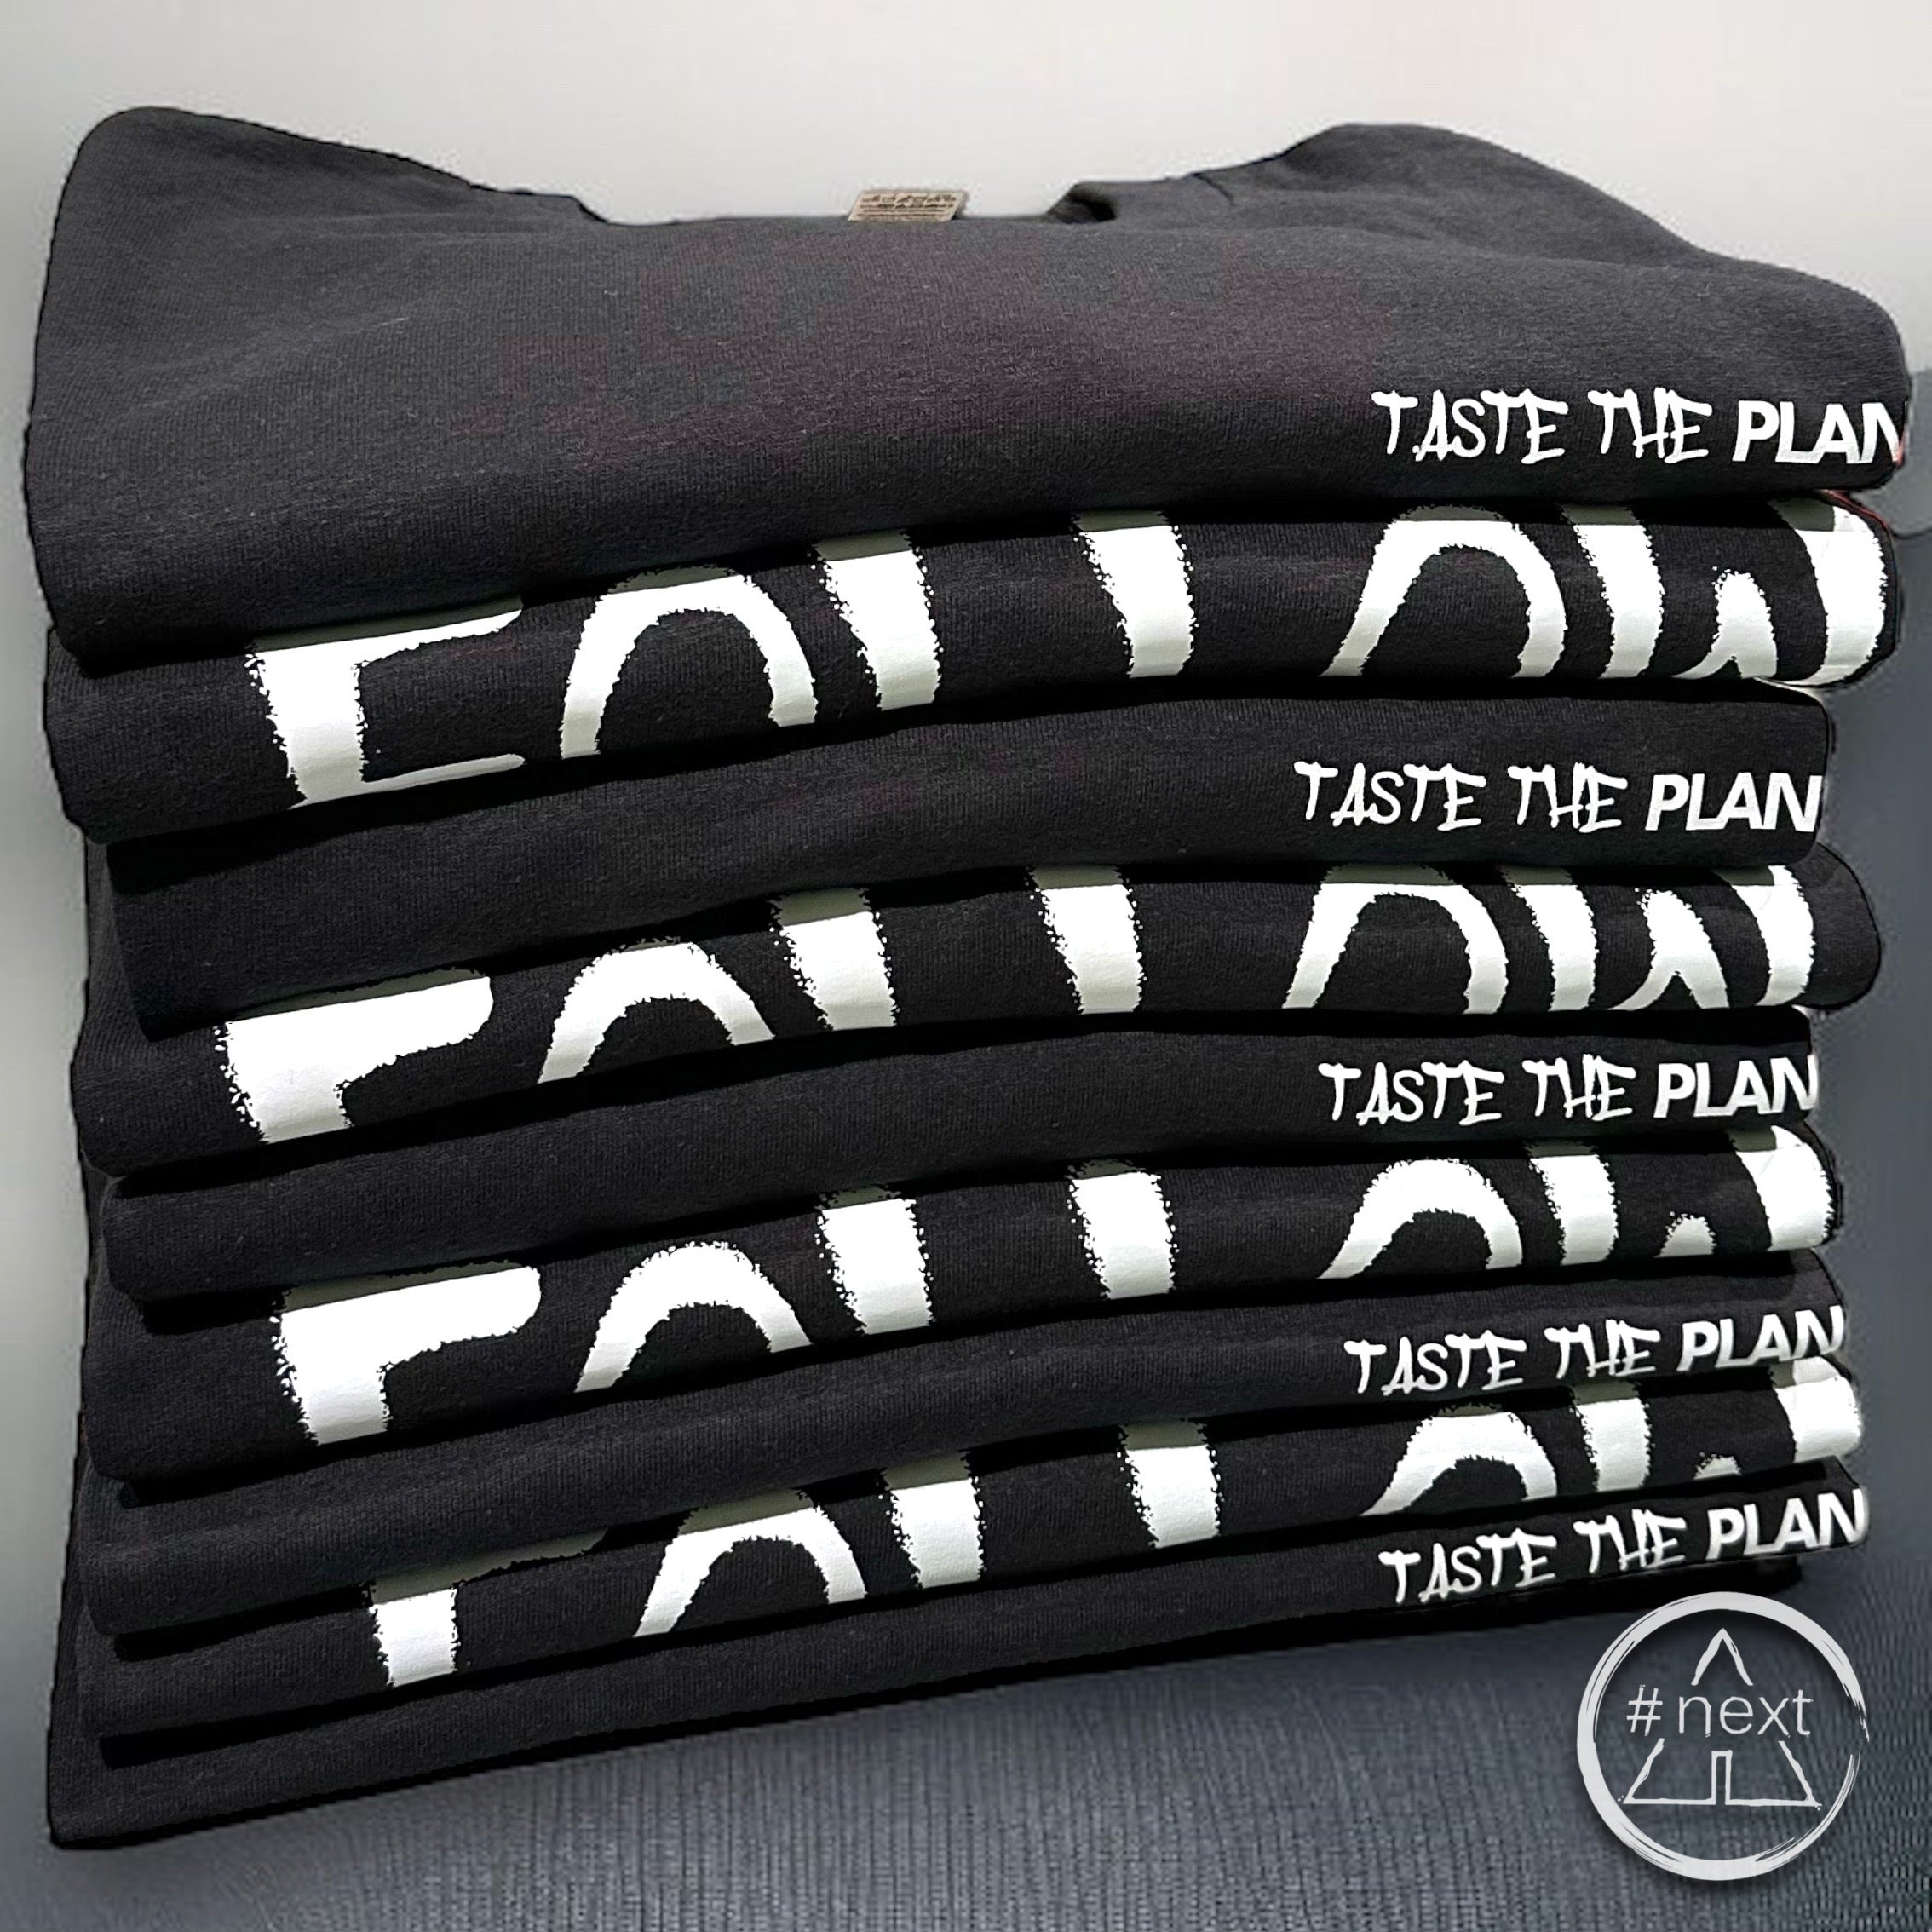 nngr2 - T-shirt in cotone 100% - I HAVE A PLAN - Follow Your Drink - Nero